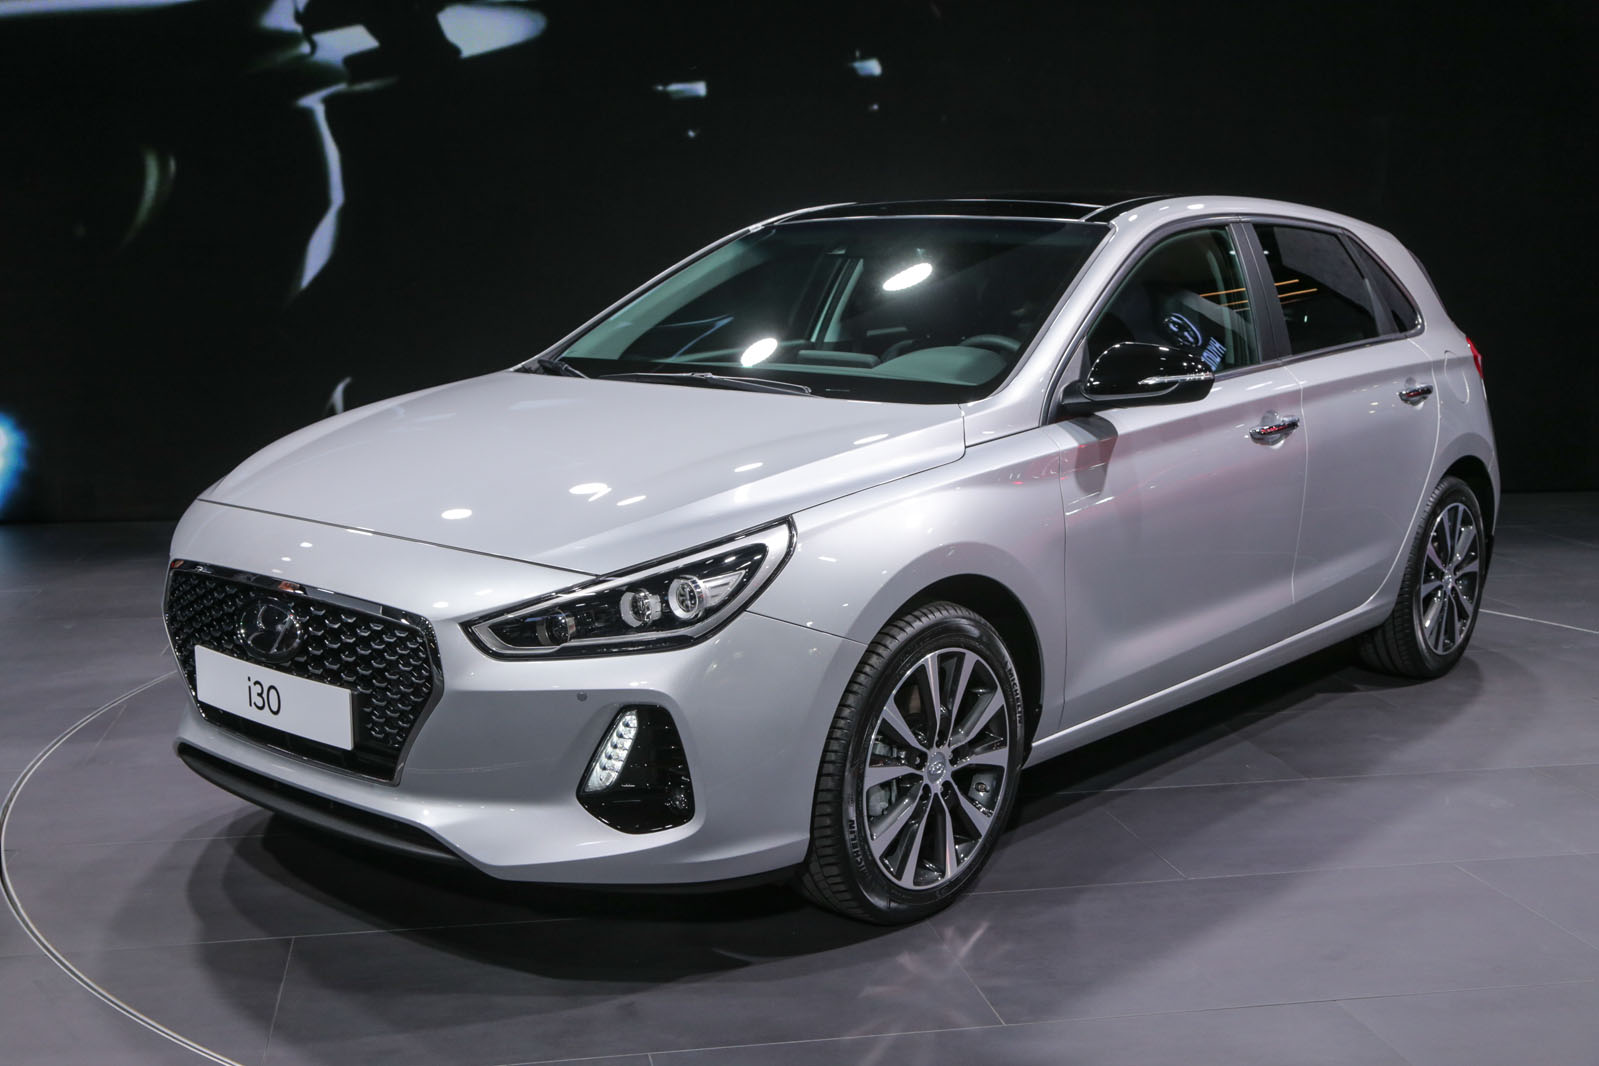 Allnew Hyundai i30 on sale from £16,995 this March Autocar